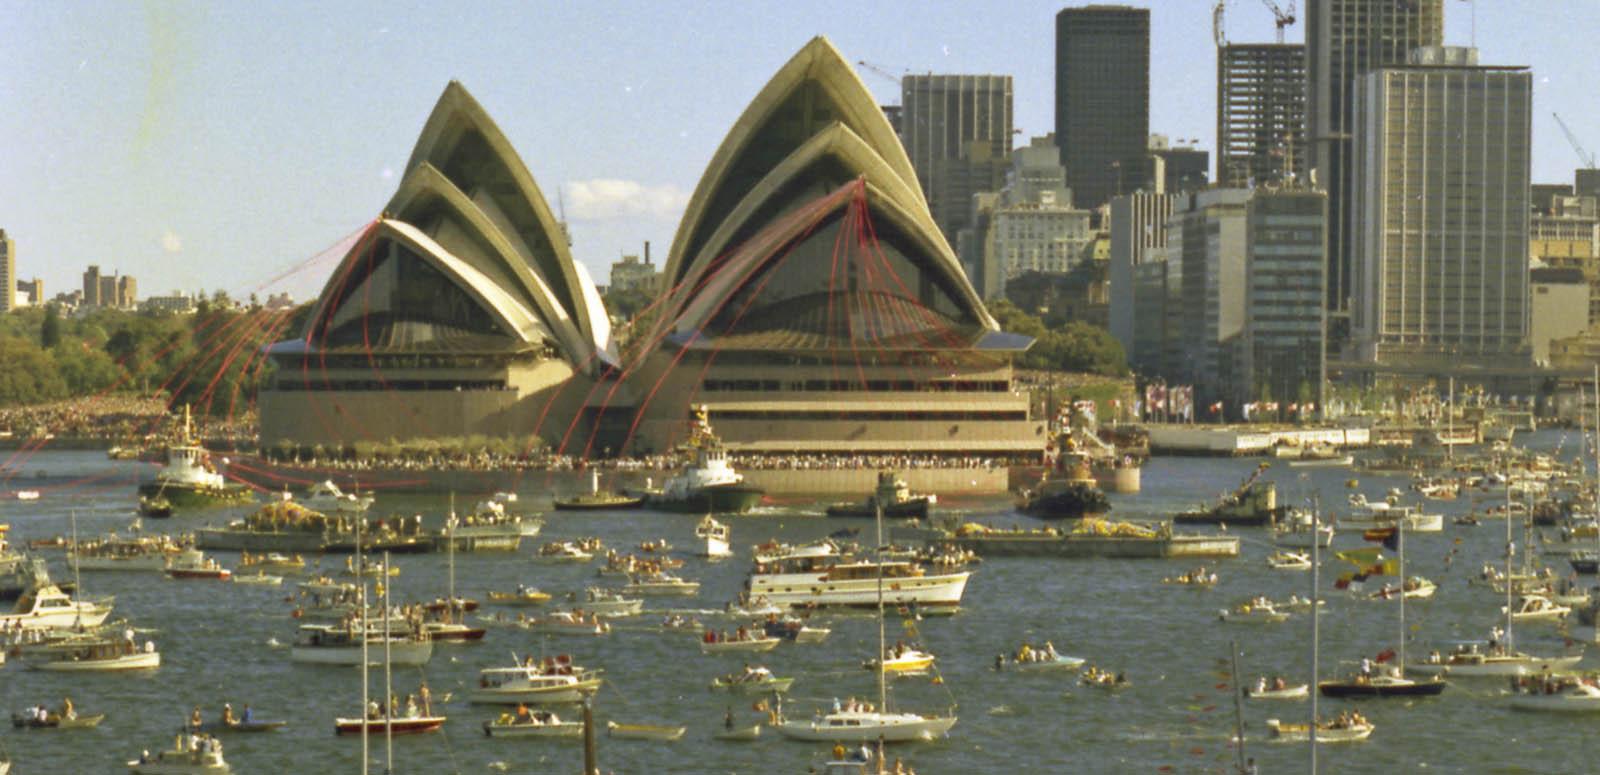 The Sydney Opera House is festooned with red ribbons. There are many boats on the water in front of it.